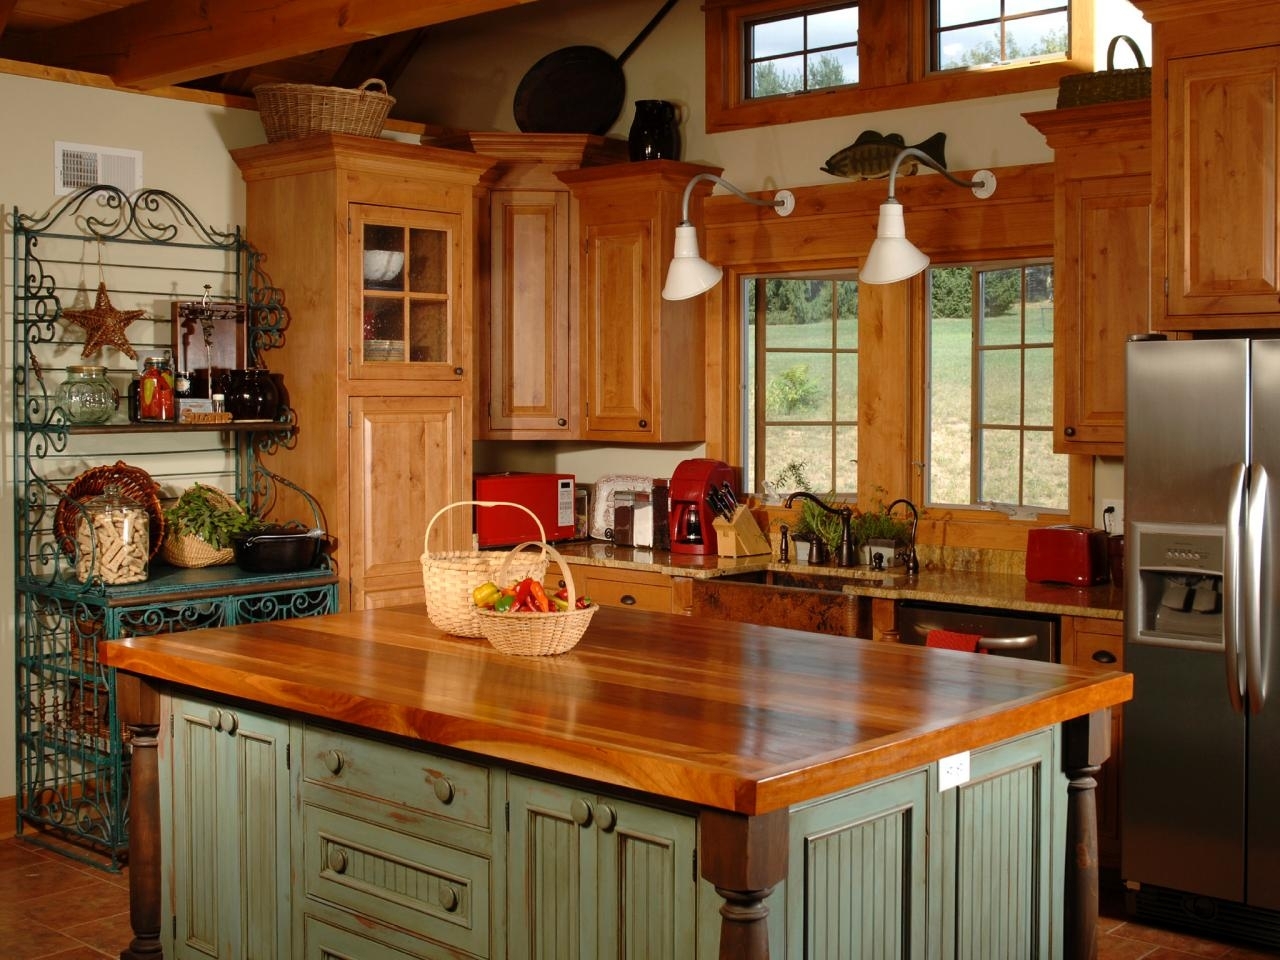 10 Most Popular Country Kitchen Decorating Ideas On A Budget 2021